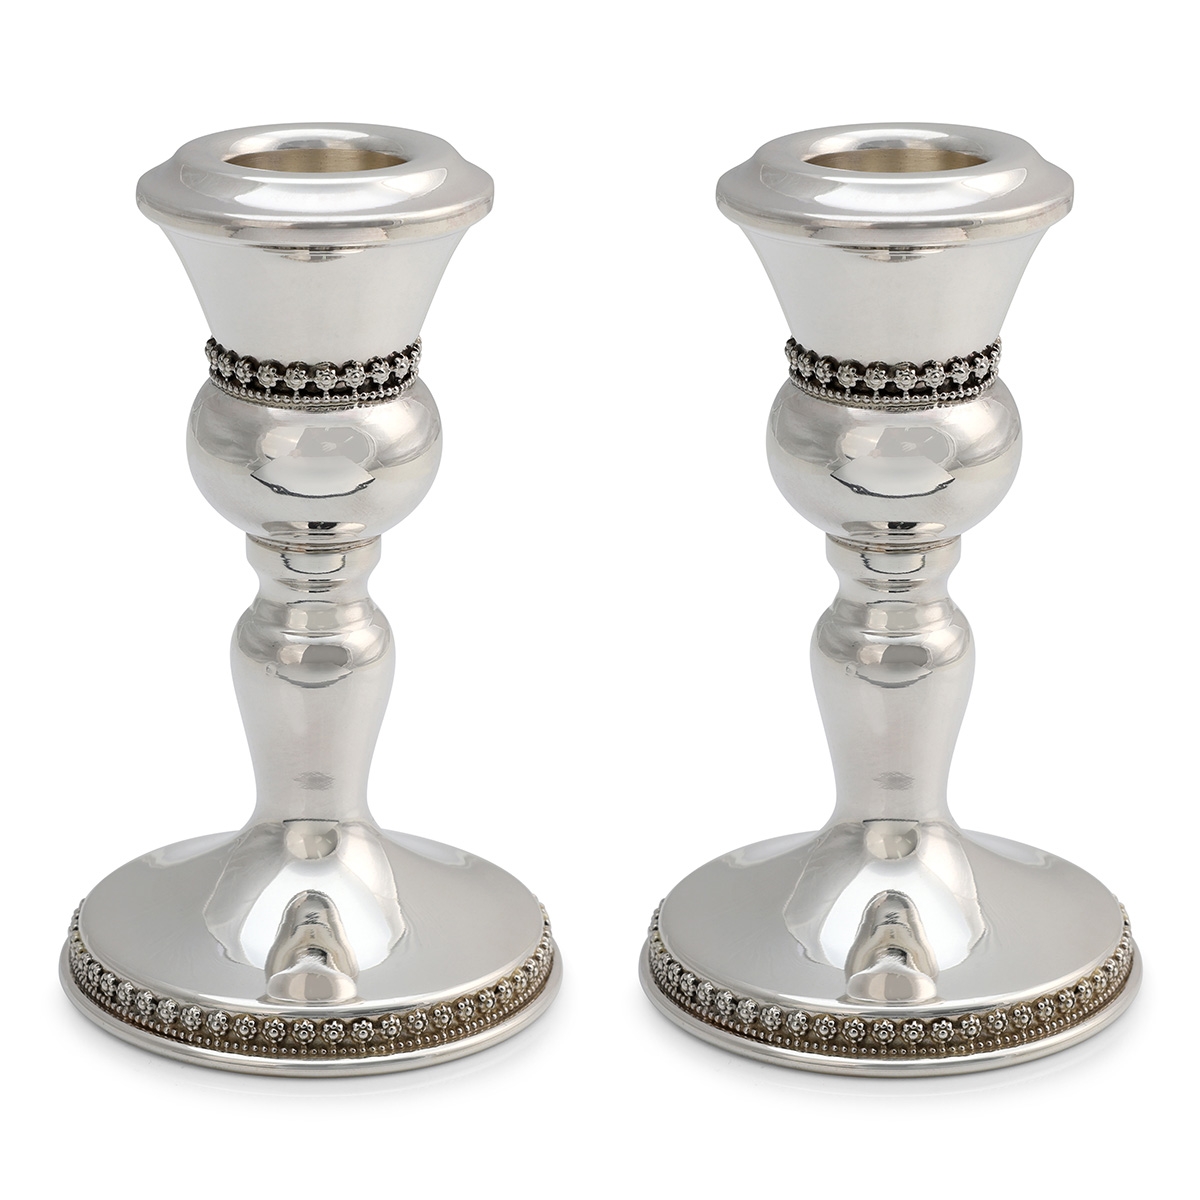 Handcrafted Sterling Silver Shabbat Candlesticks With Floral Filigree Design By Traditional Yemenite Art - 1